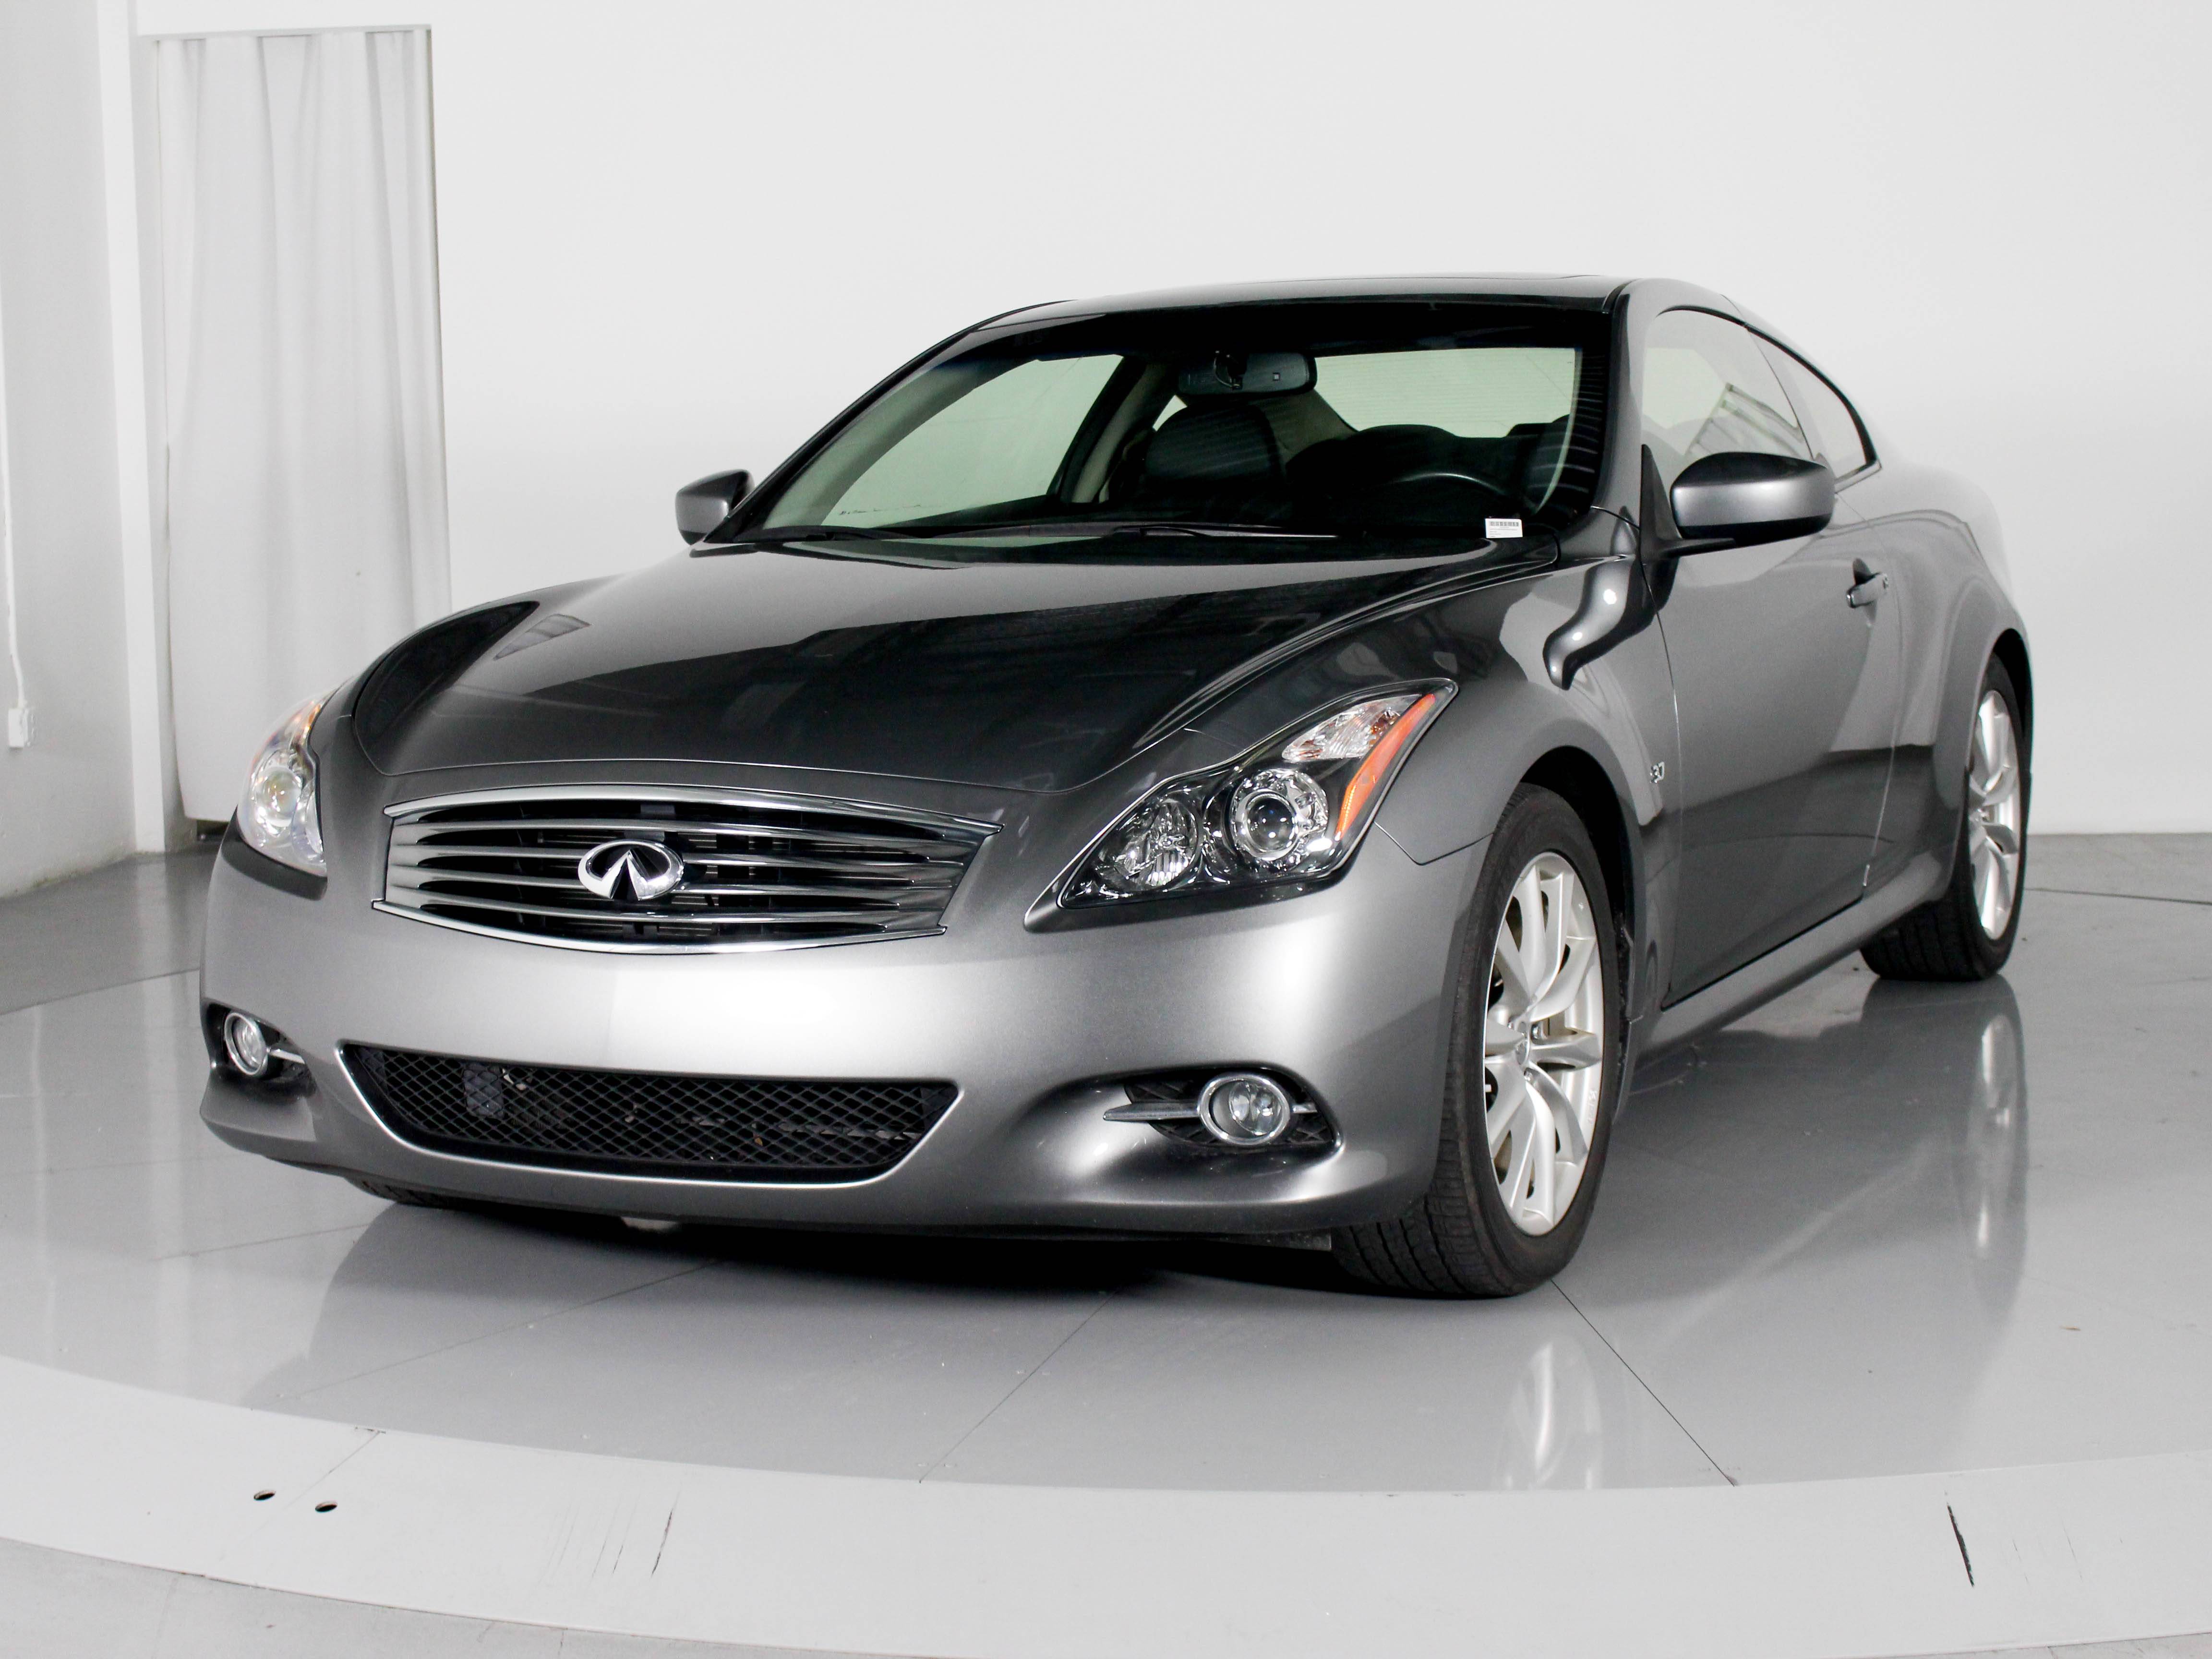 Used 2015 Infiniti Q60 Journey Coupe For Sale In Miami Fl 98849 Images, Photos, Reviews